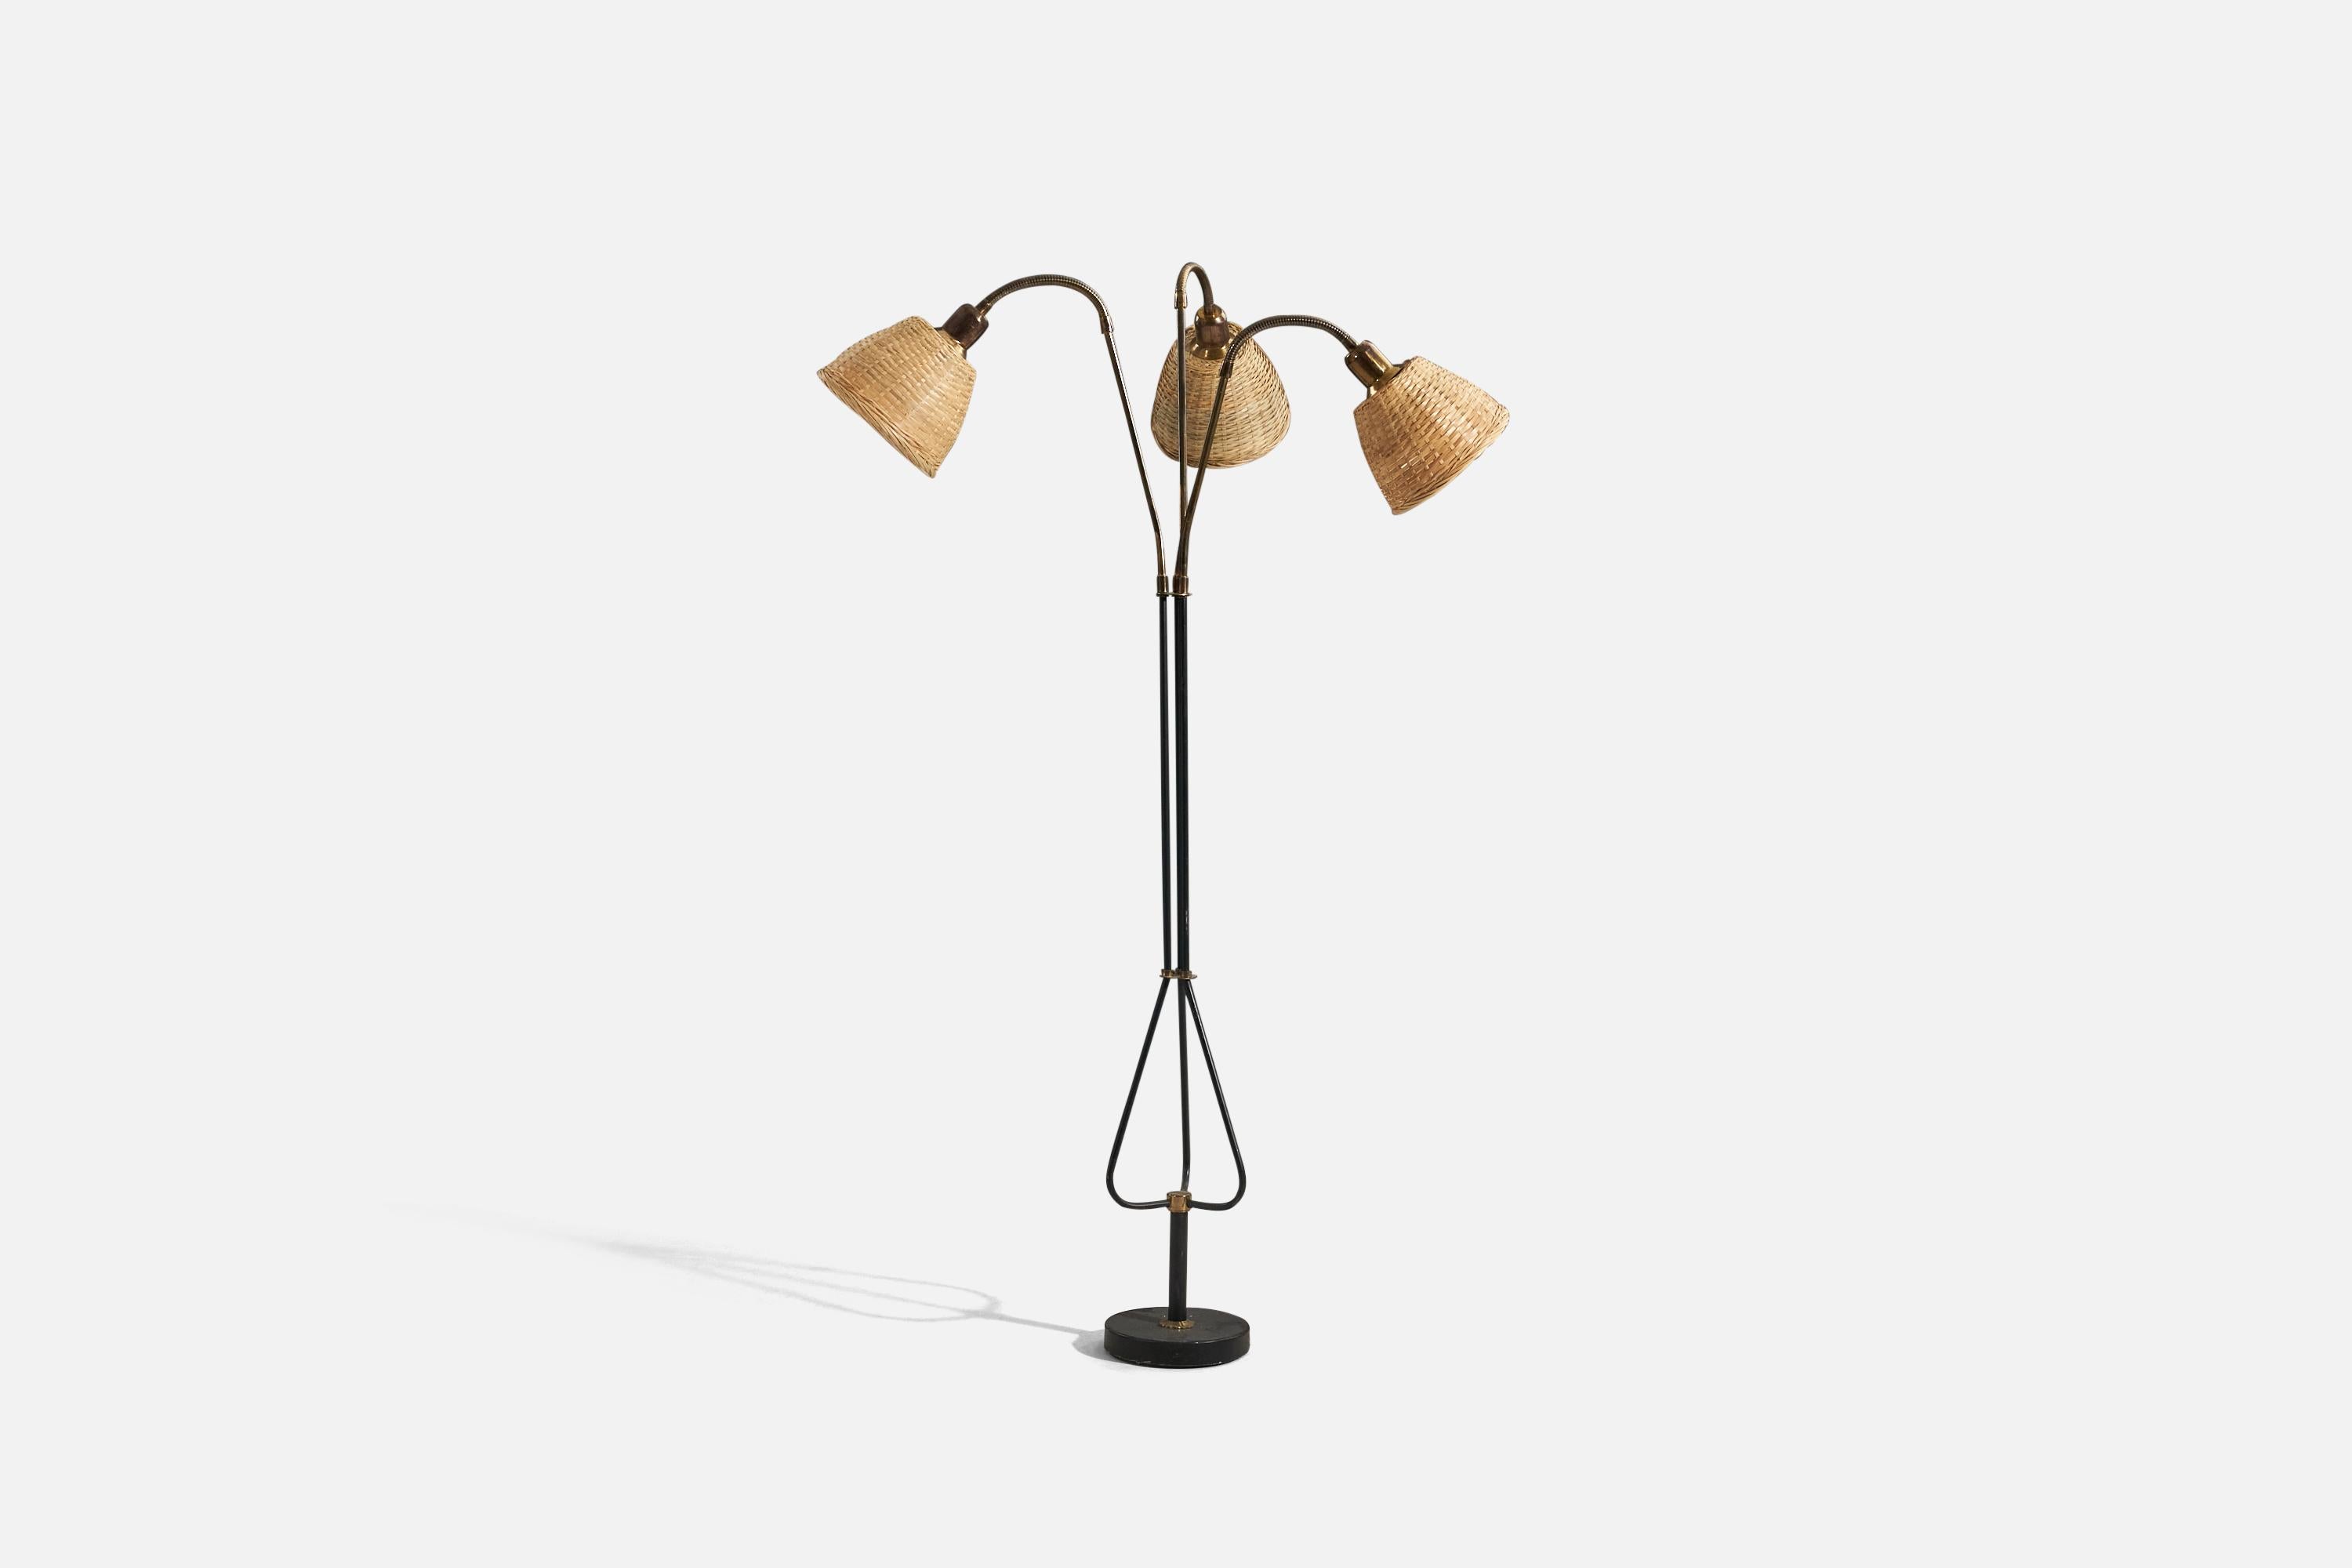 A brass, black-lacquered metal and rattan, adjustable floor lamp designed and produced in Sweden, 1950s.

Variable dimensions, measured as illustrated in the first image.
Sold with Lampshade(s). 
Stated dimensions refer to the Floor Lamp with the